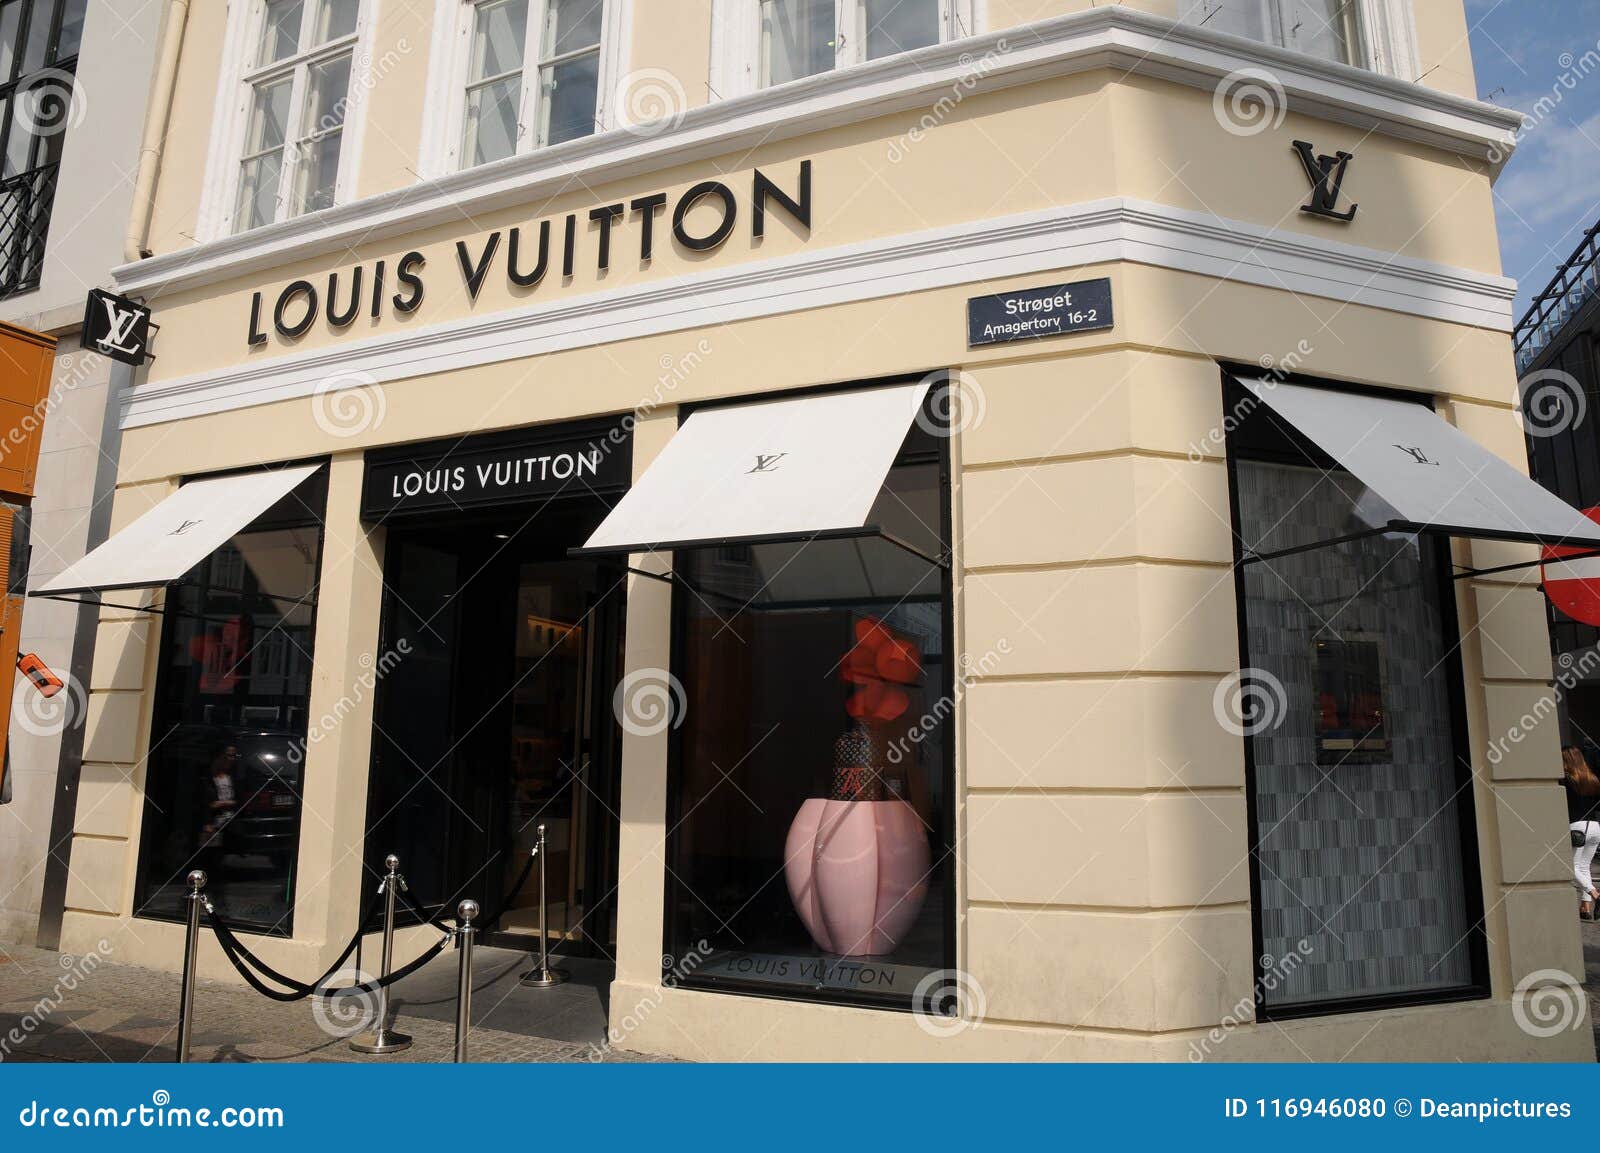 LOUIS VUITTON SHOPERS in COPENHAGEN Editorial Image - of females, france: 116946080